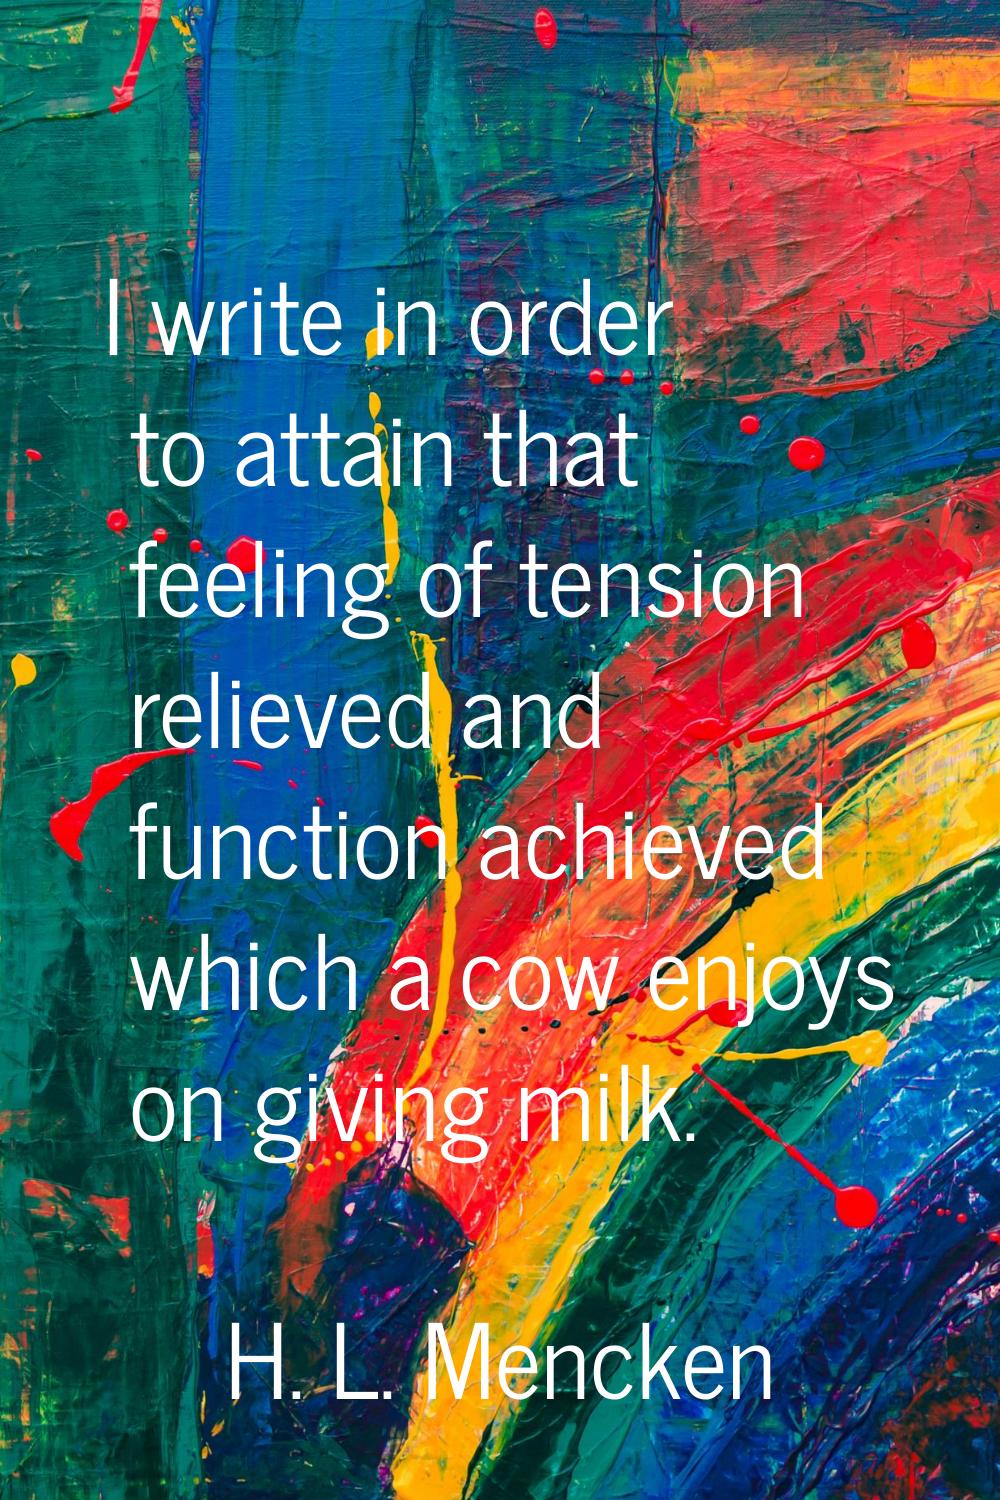 I write in order to attain that feeling of tension relieved and function achieved which a cow enjoy